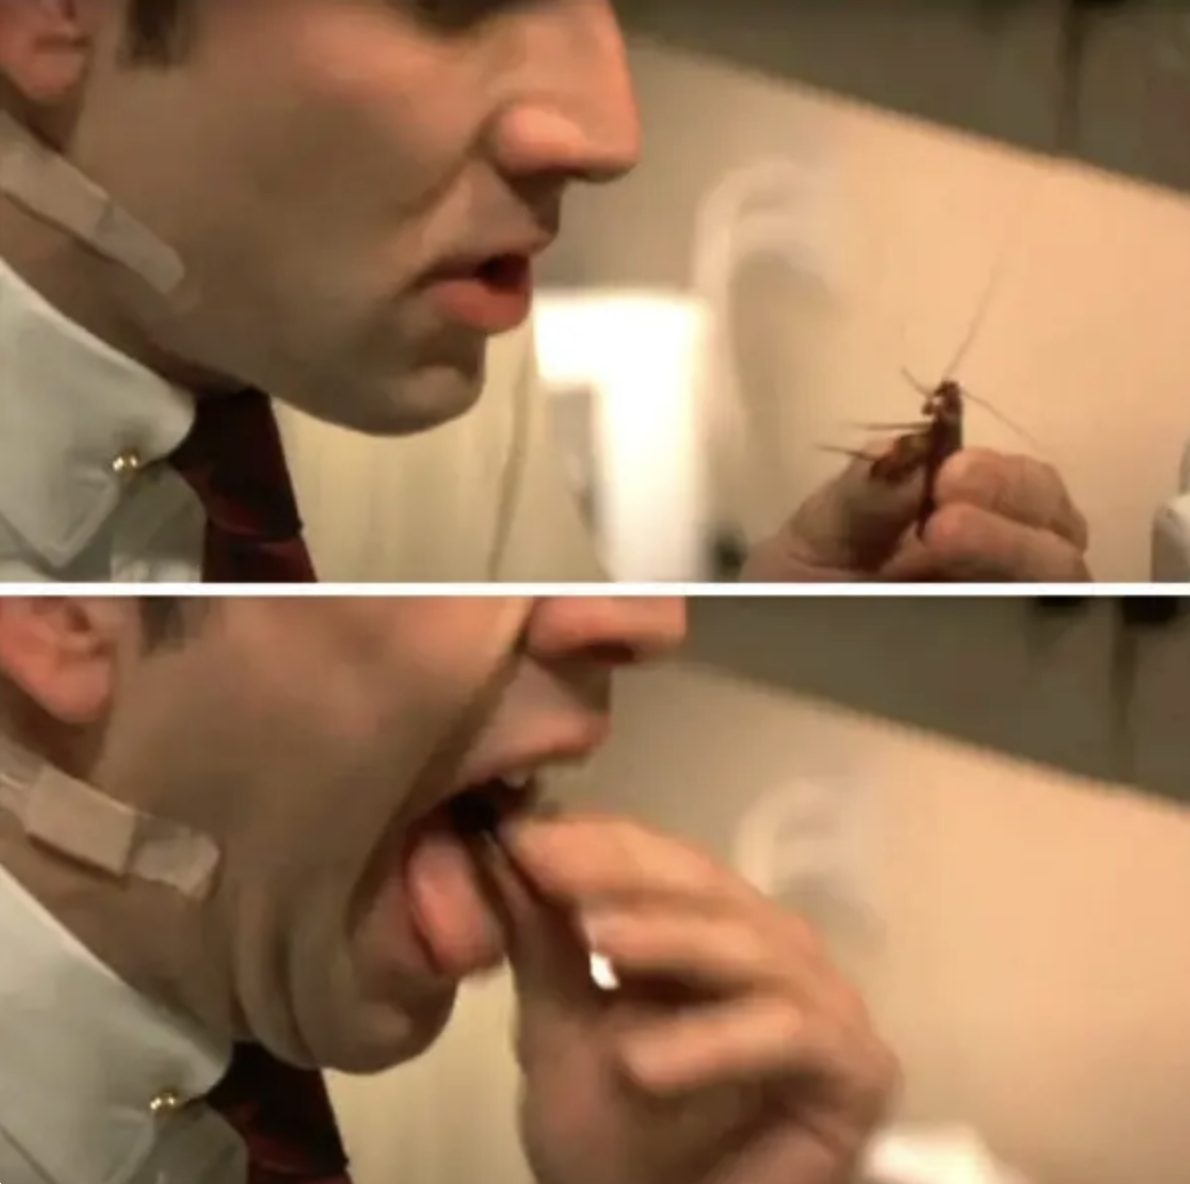 in a scene from the movie, Nic puts a cockroach in this mouth